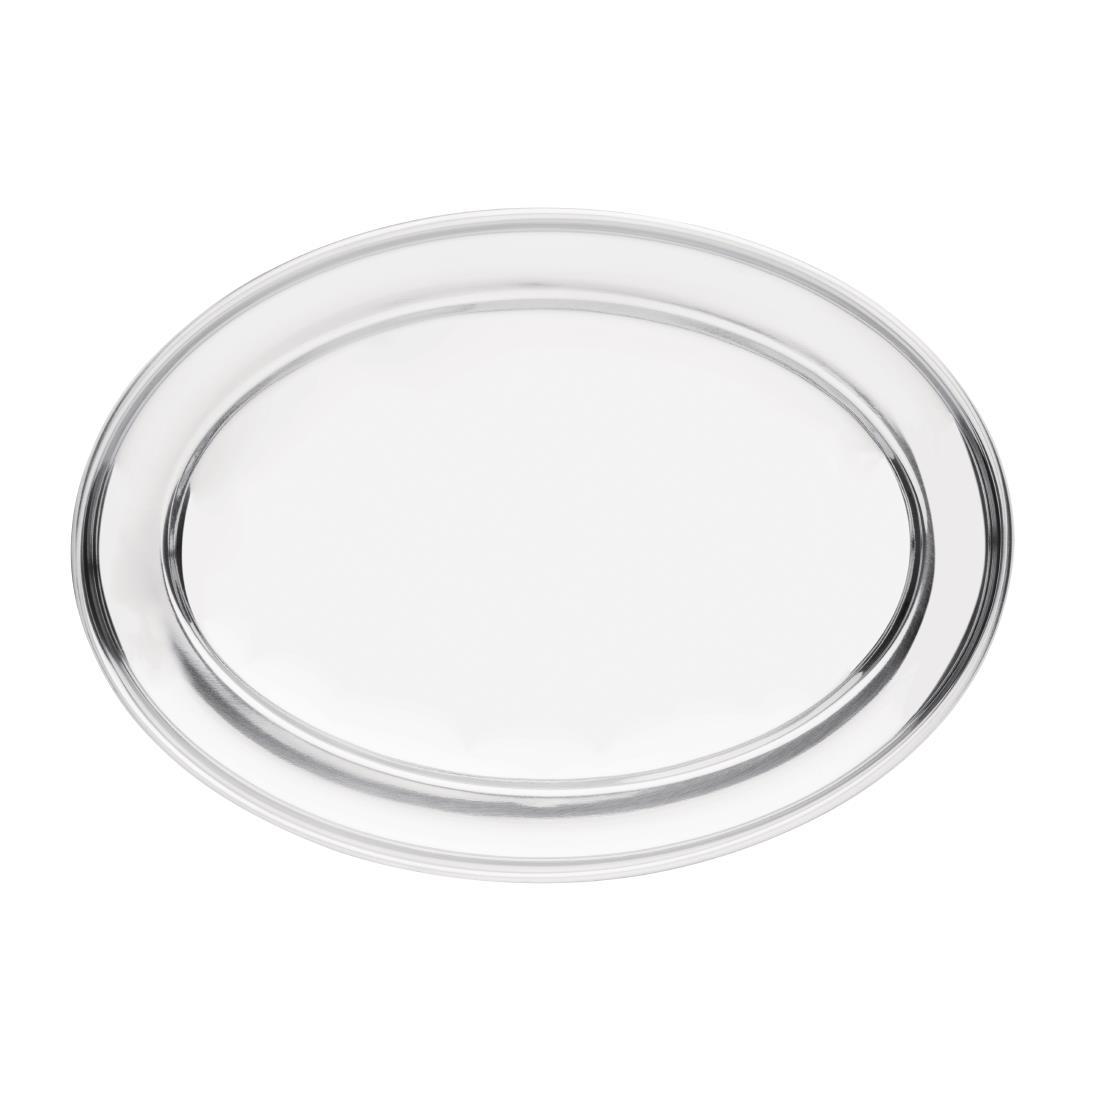 Olympia Stainless Steel Oval Serving Tray 300mm - K363  - 5